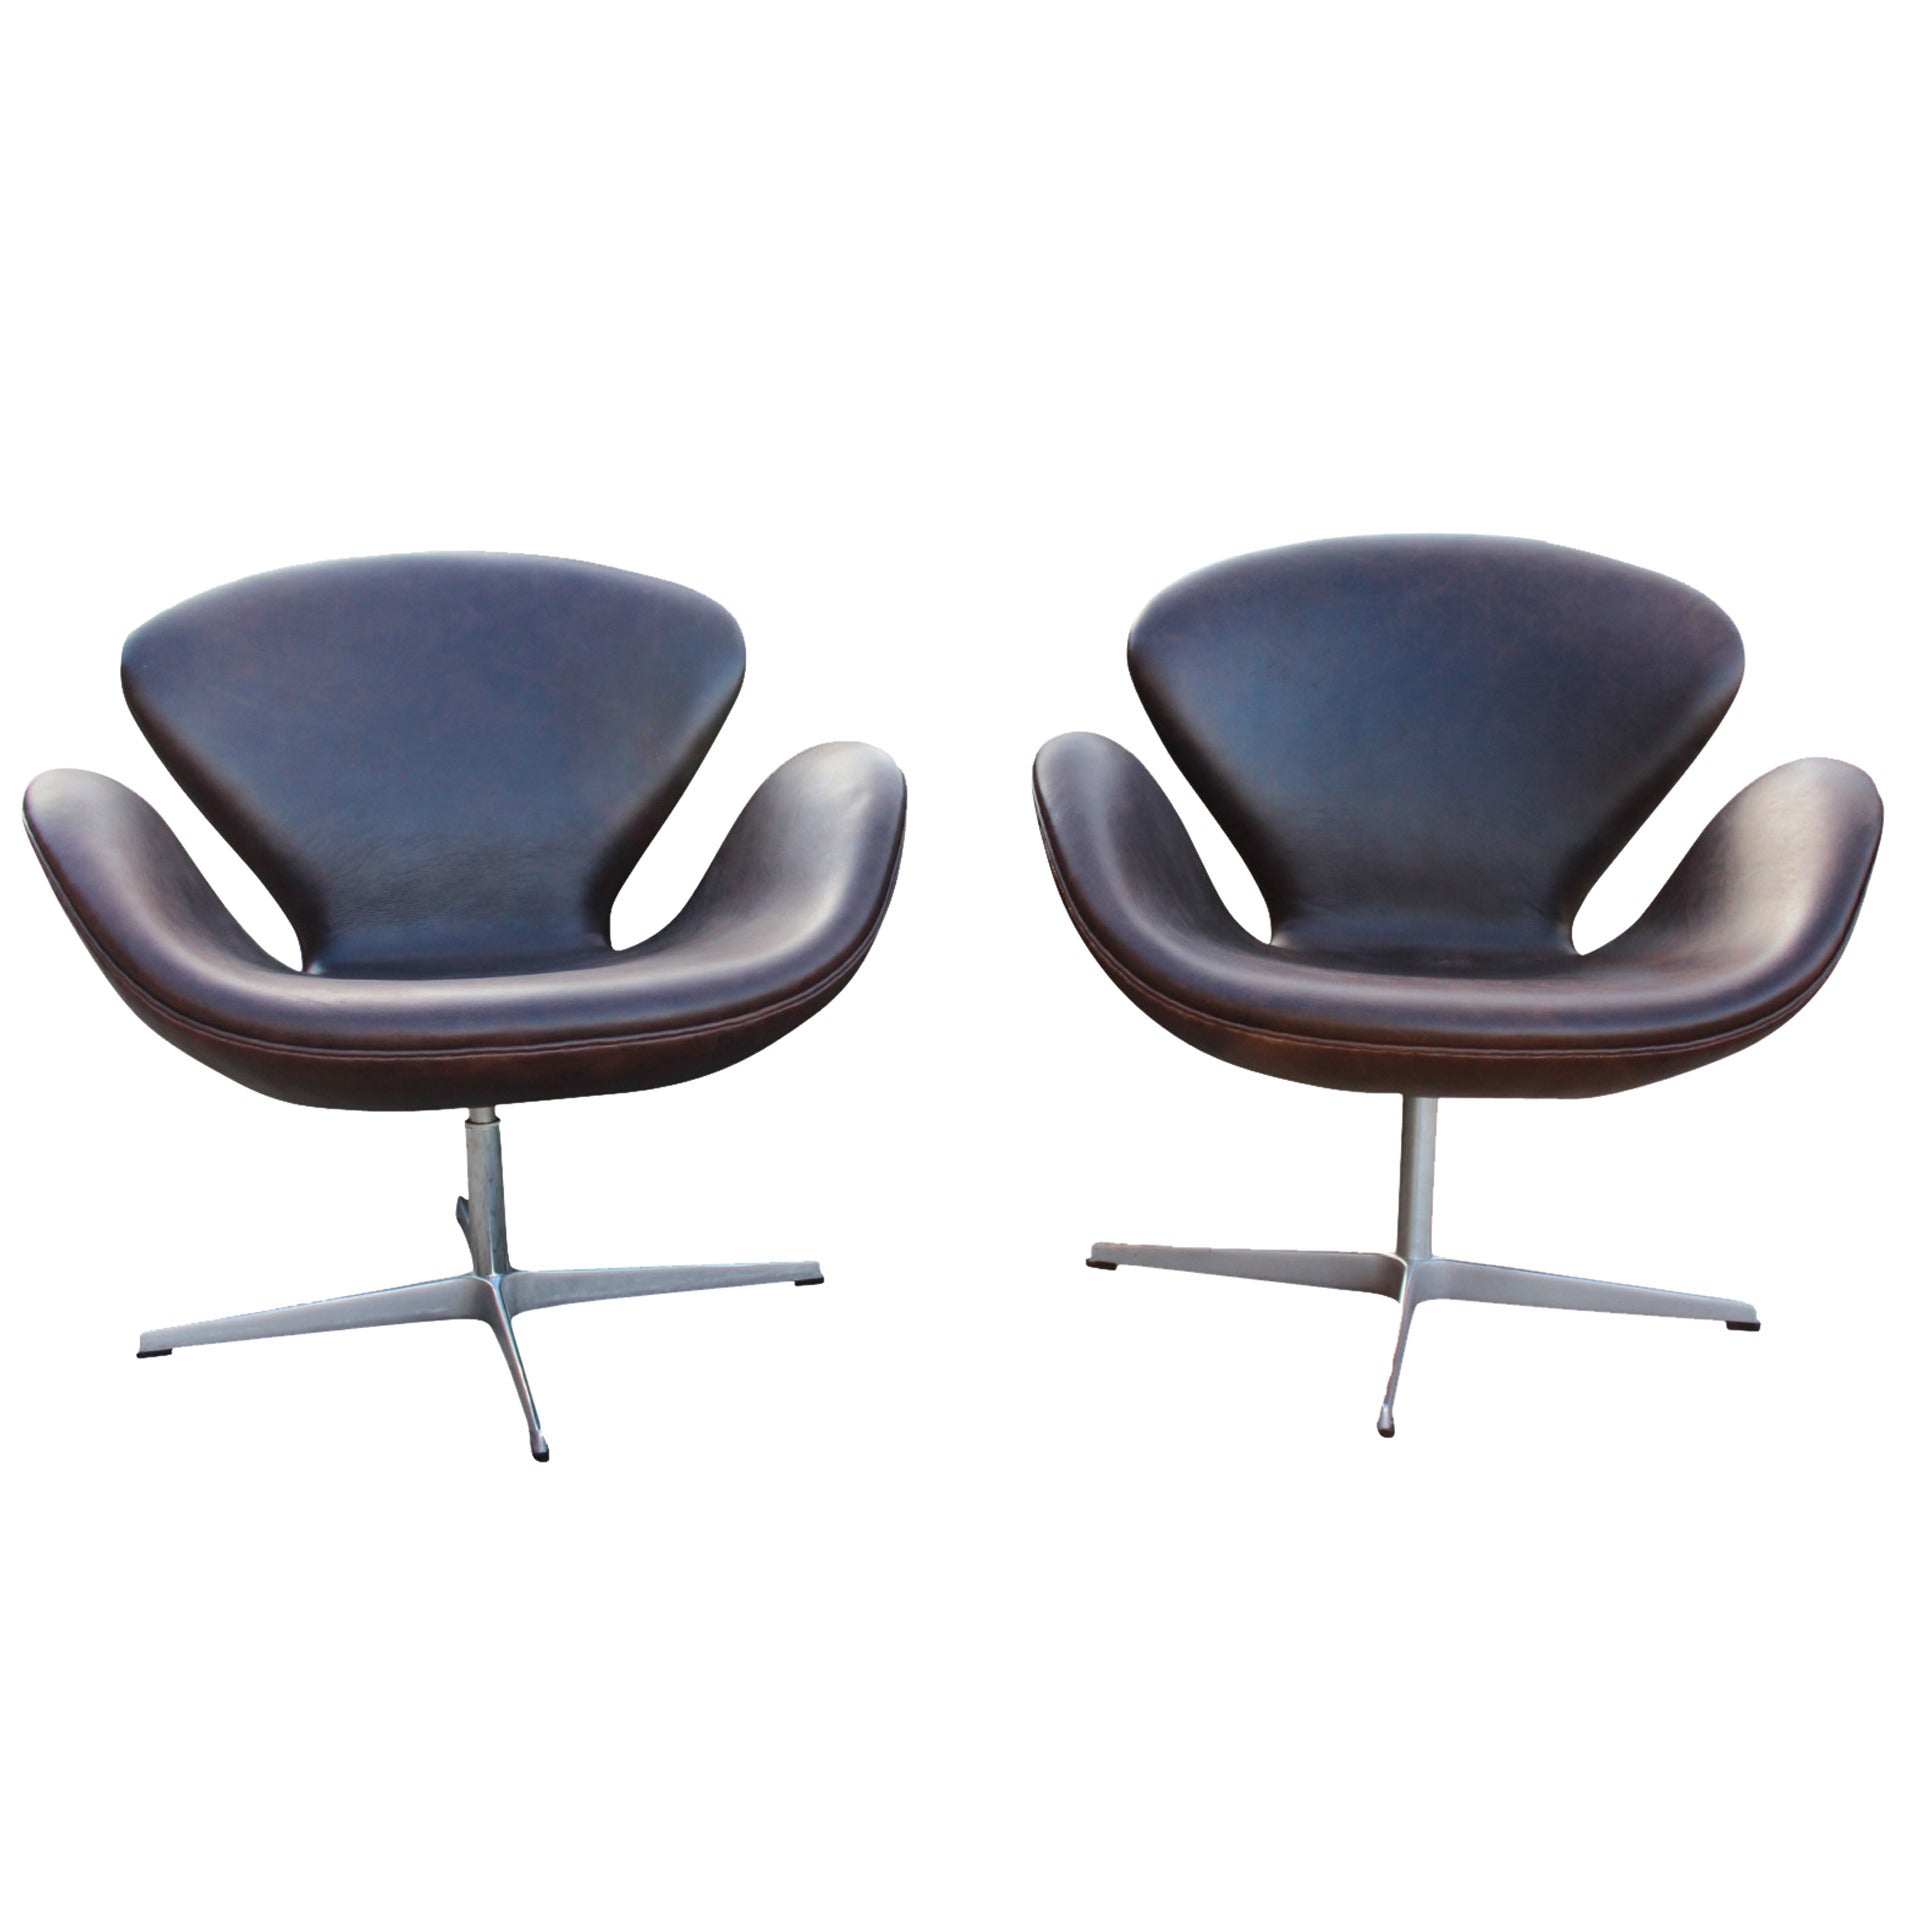 Pair of Swan Chairs, FH 3320, by Arne Jacobsen and by Fritz Hansen, 1999